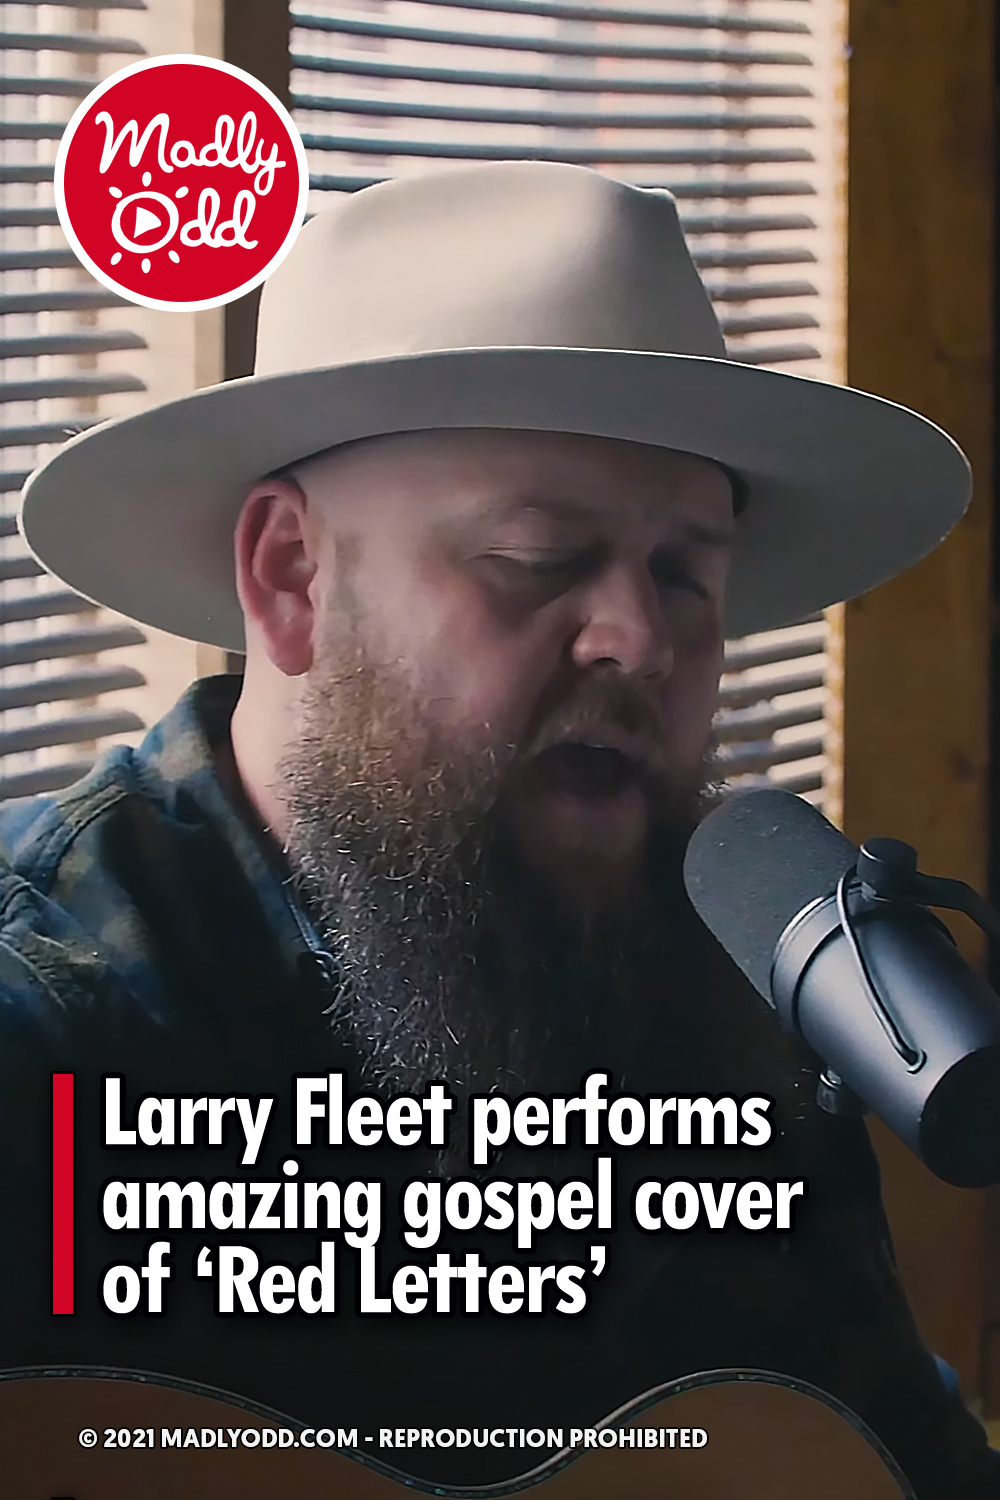 Larry Fleet performs amazing gospel cover of ‘Red Letters’